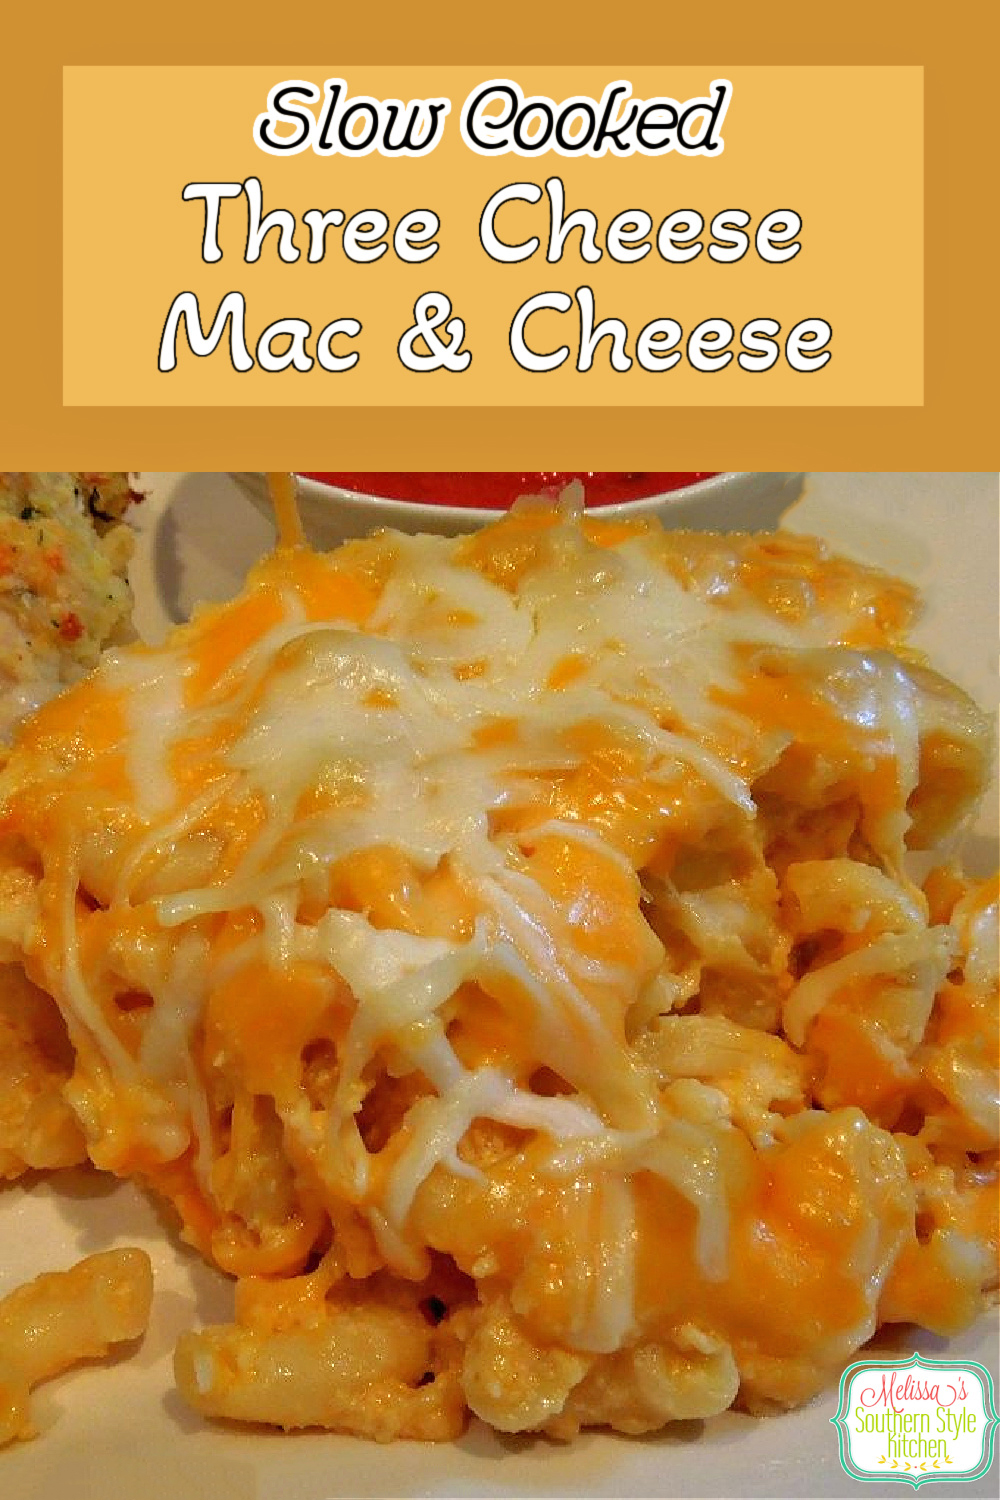 On busy oven days and during the holidays this Slow Cooked Three Cheese Mac and Cheese is a delicious side dish option #triplecheddarmacaroniandcheese #macandcheese #cheddarcheese #macandcheeserecipes #southernrecipes #casseroles #macaroni #pasta #sidedishrecipes